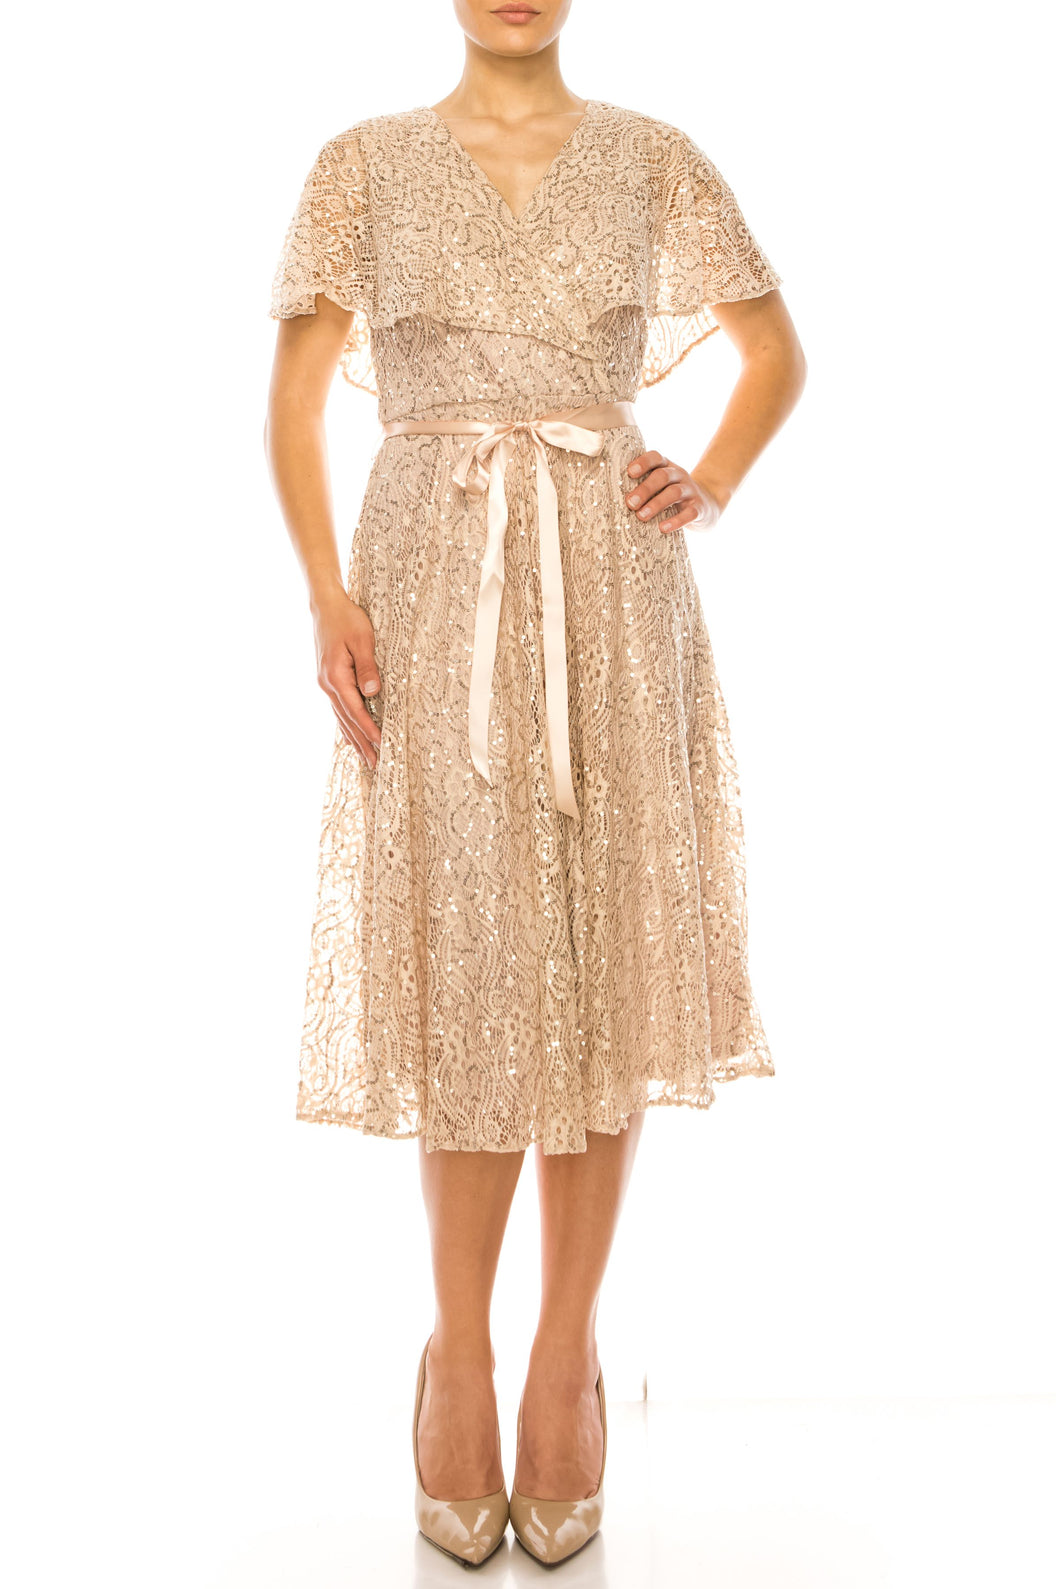 Last One, Price Drop! ONLY Sizes 6 Remaining!  Julian Taylor Sequin & Lace Party Dress Midi, Cocktail Apparel, Modest in Vegas Attire